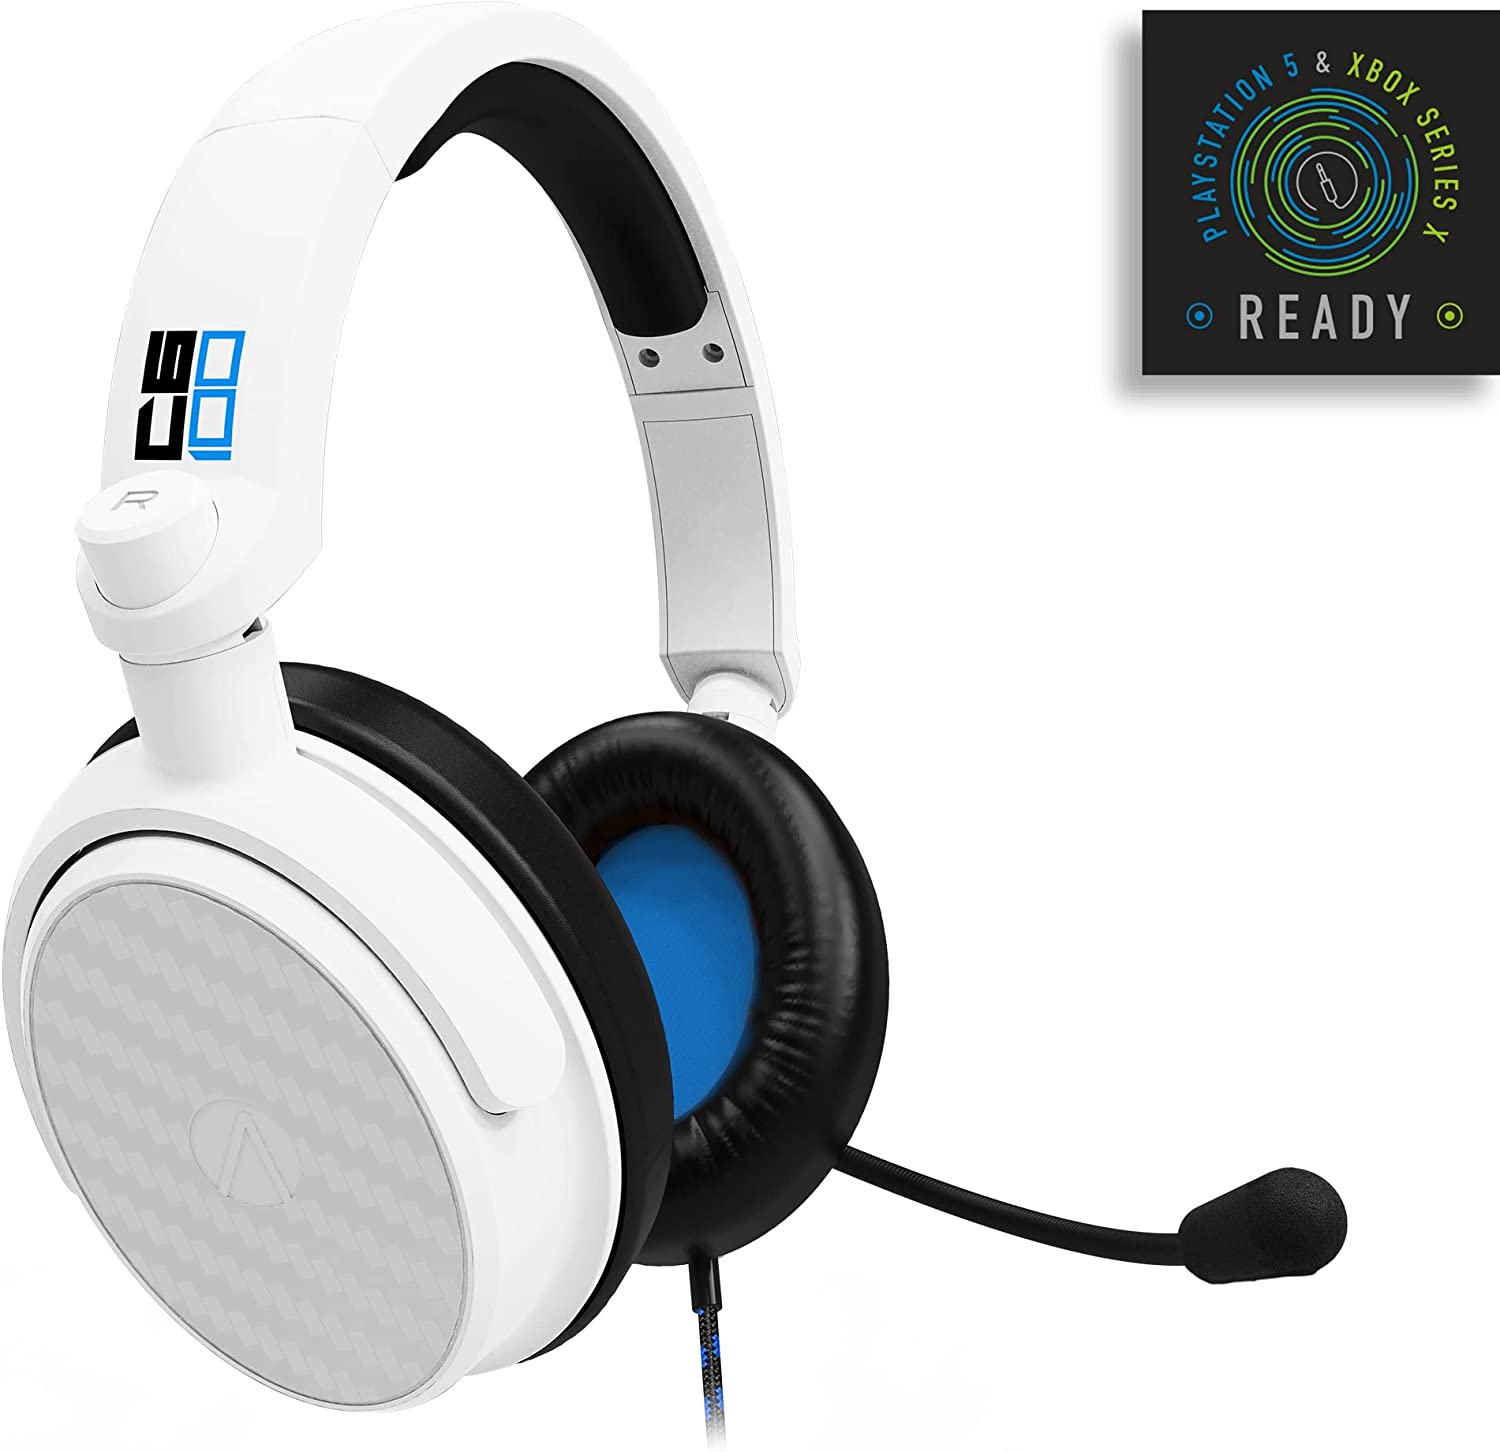 Stealth C6-100 Gaming Headset (White/Blue)